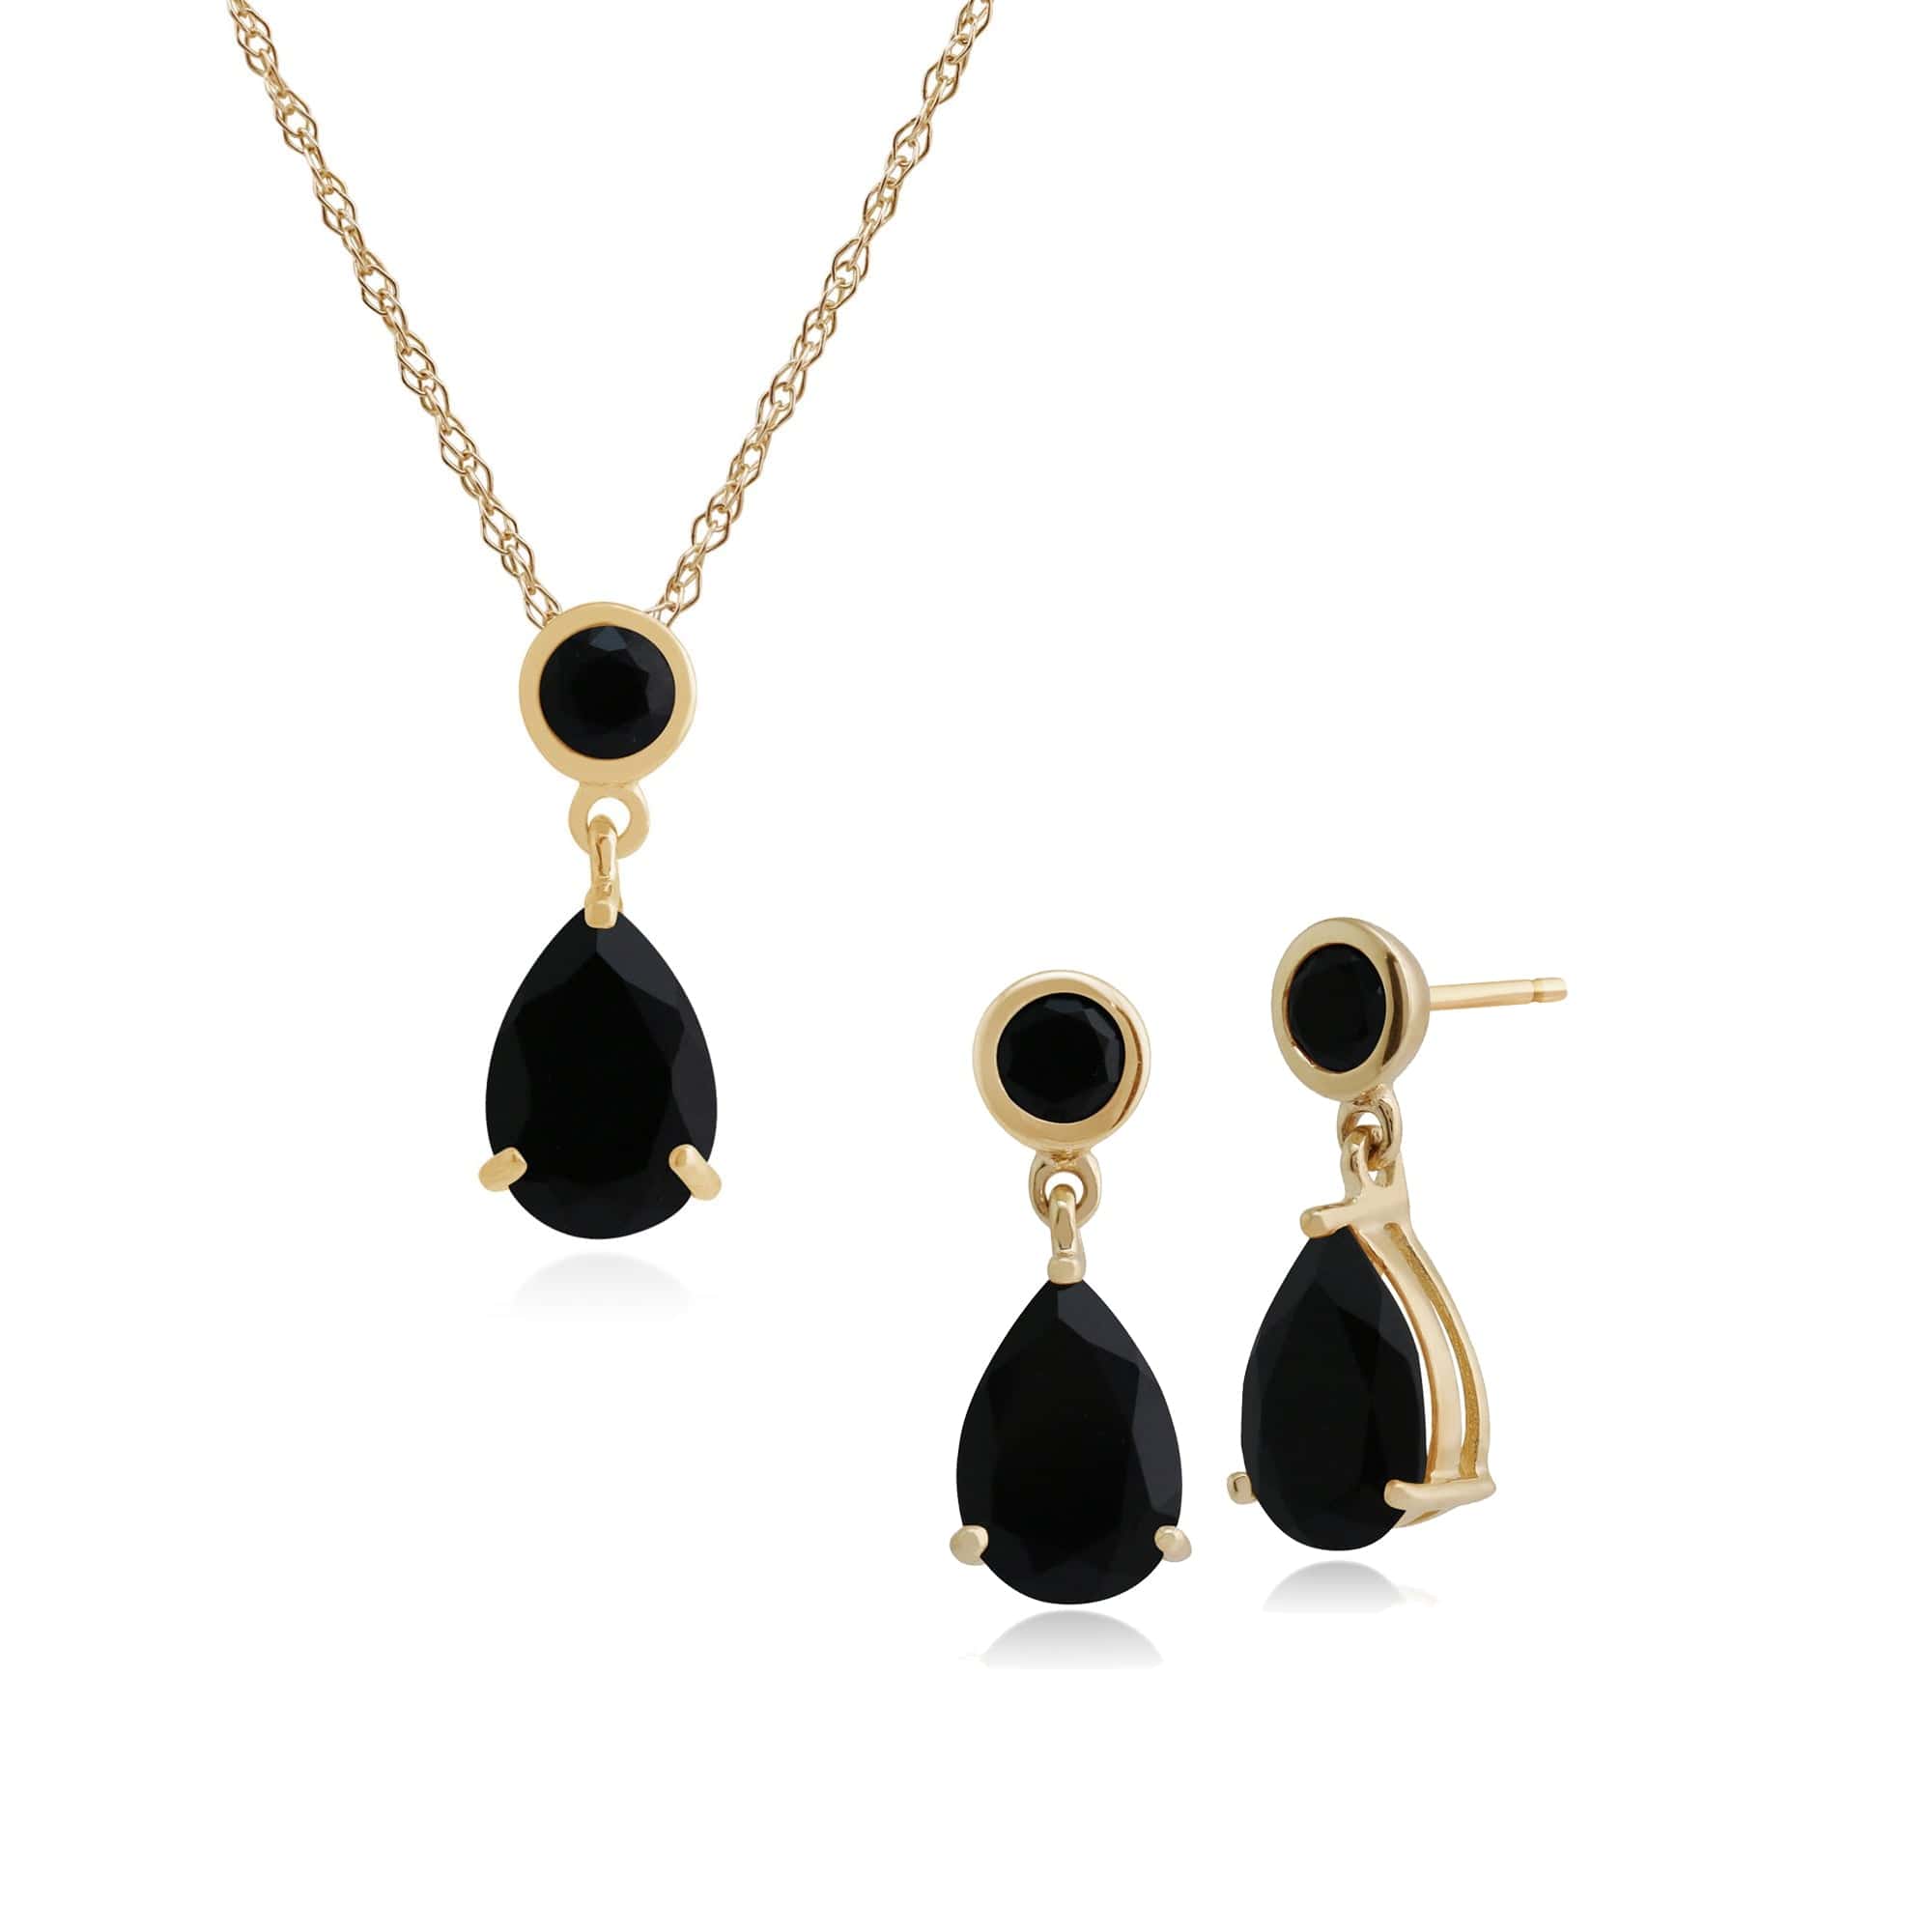 186E0148089-186P0188089 Classic Pear & Round Onyx Drop Earrings & Pendant Set in 9ct Yellow Gold 1